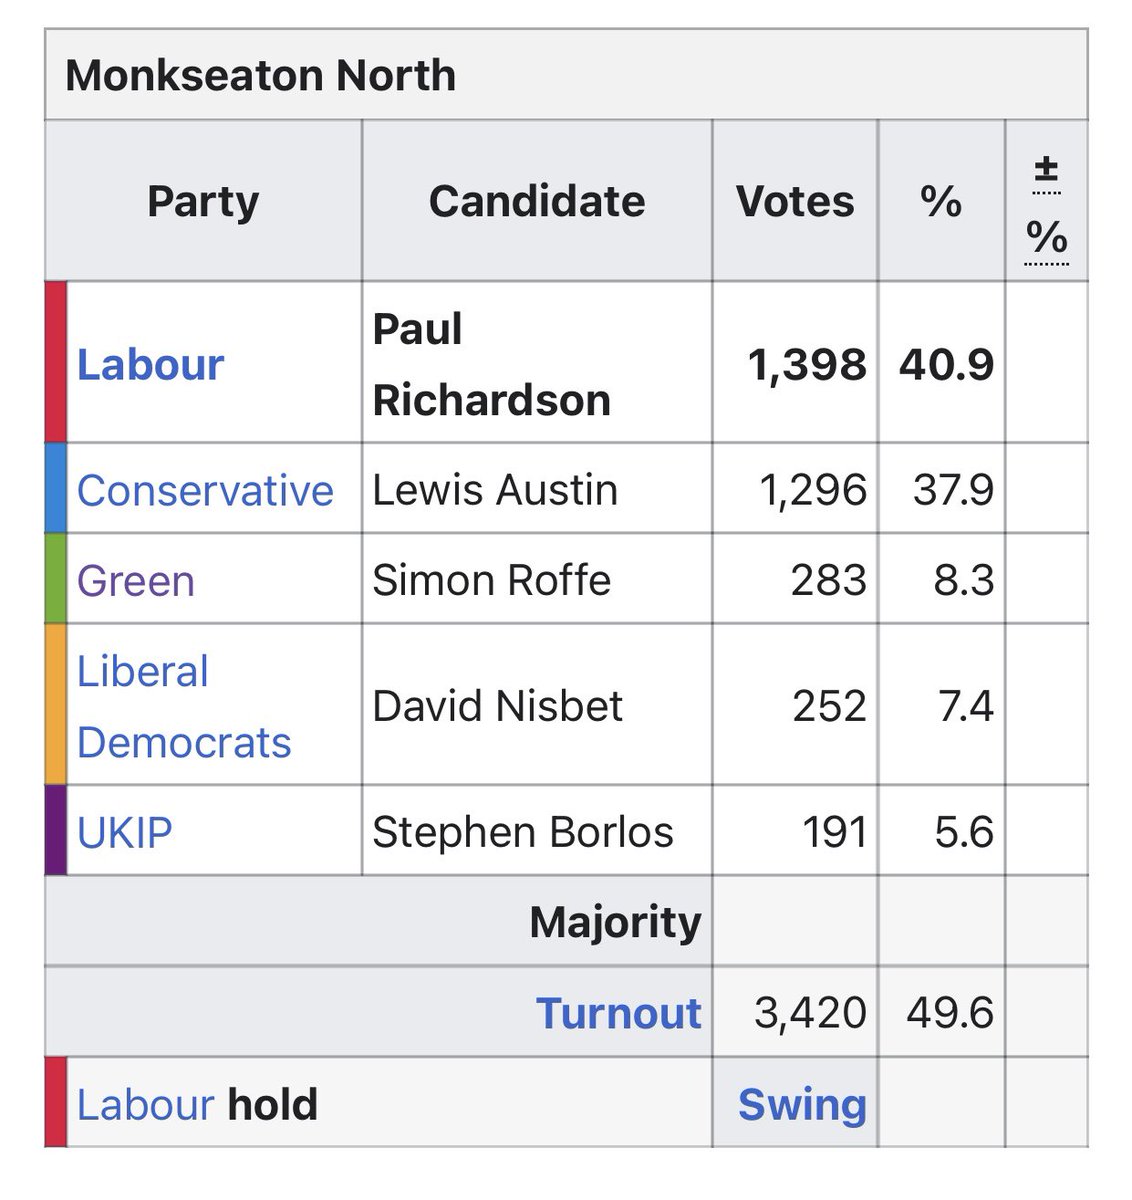 Monkseaton North is a rare example of the Labour Party doing well - clearly a result of the on the ground activism and campaigning carried out by a very active labour branch. This is the ONLY seat where Tory vote has decreased (-1.0%) while Labour vote increased (+11.1%)